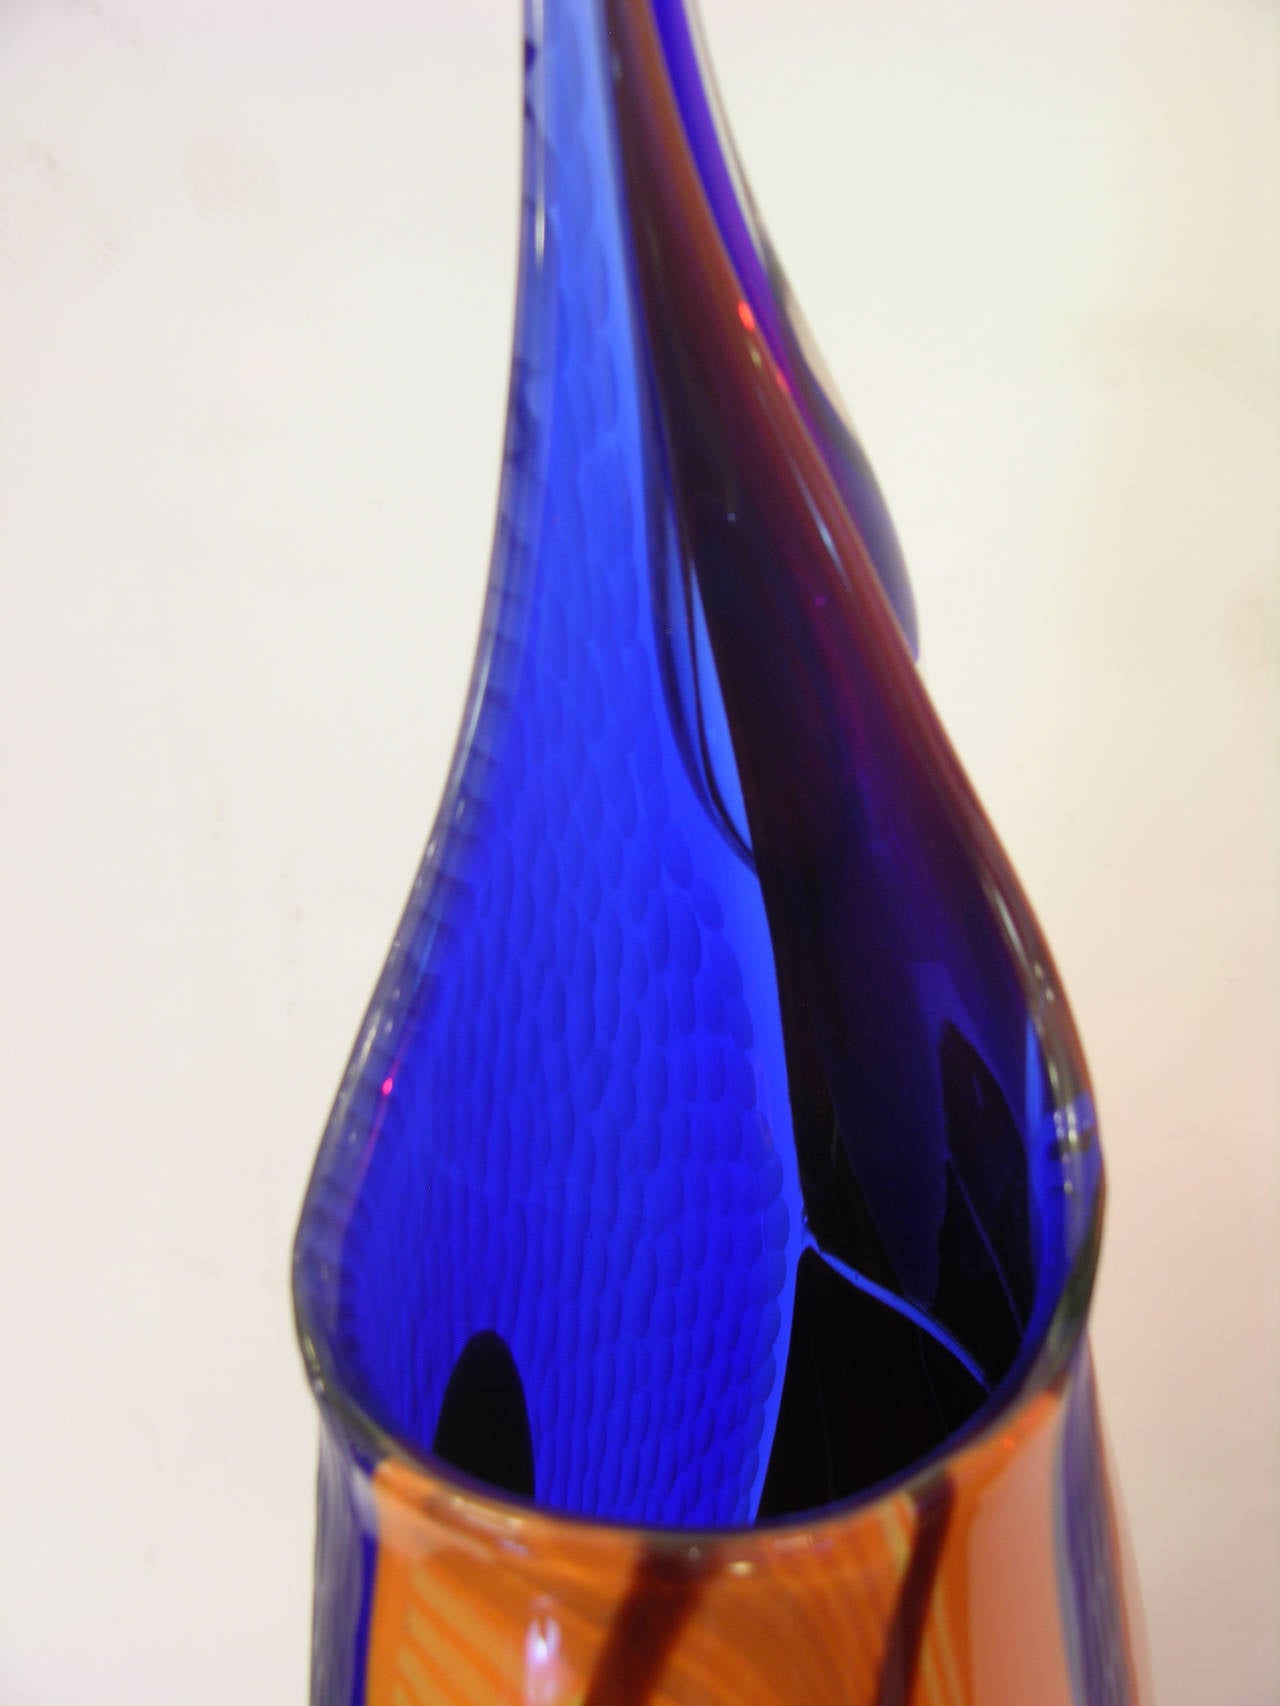 Exceptional Mouth Blown Murano Glass Vase by Davide Dona' 2